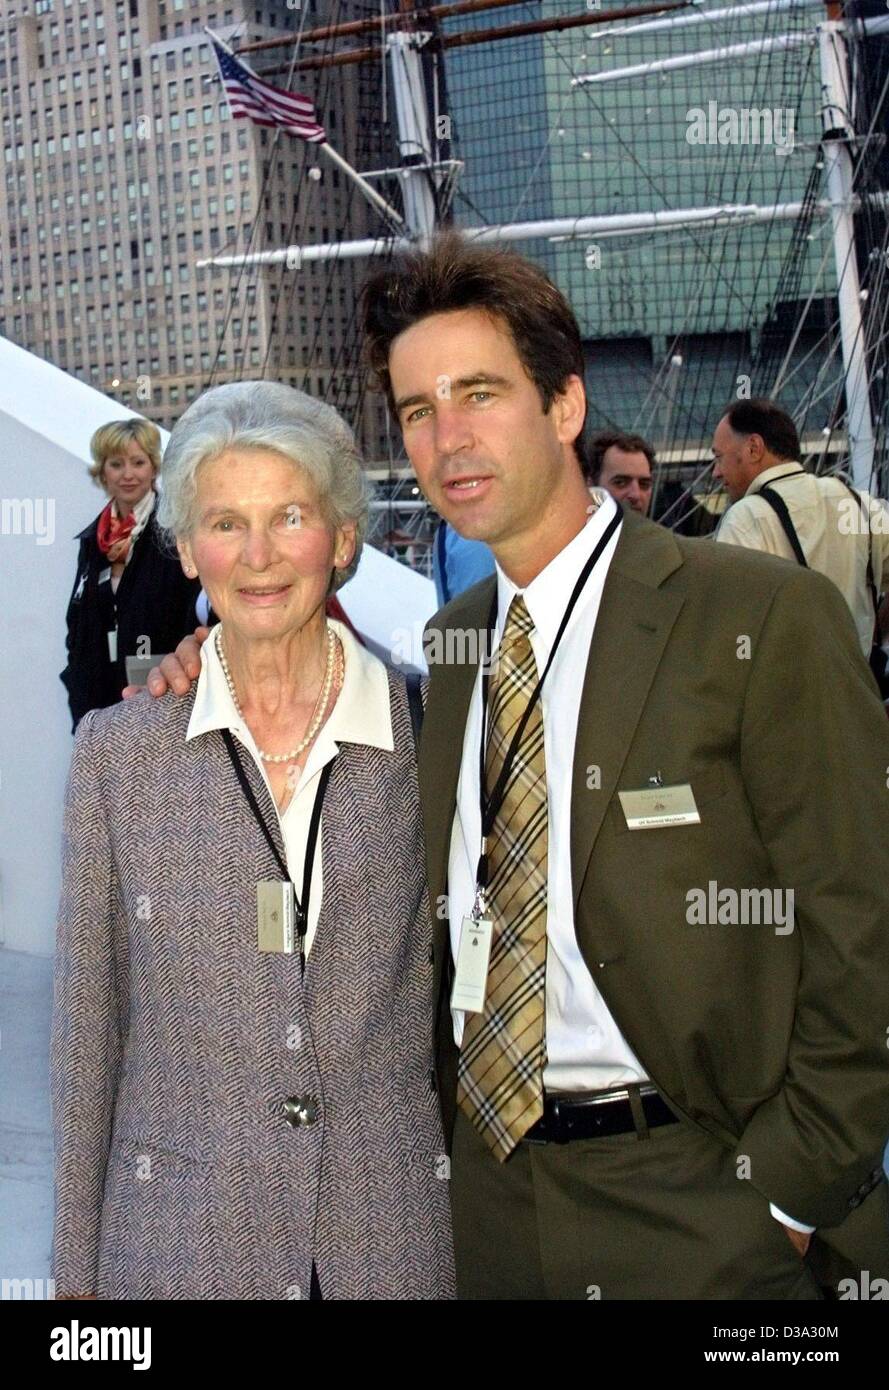 Irmgard Schmid-Maybach, Maybach's granddaughter, poses with her son during  the presentation of the new Maybach limousine in Wall Street, New York  City, 2 July 2002 Stock Photo - Alamy